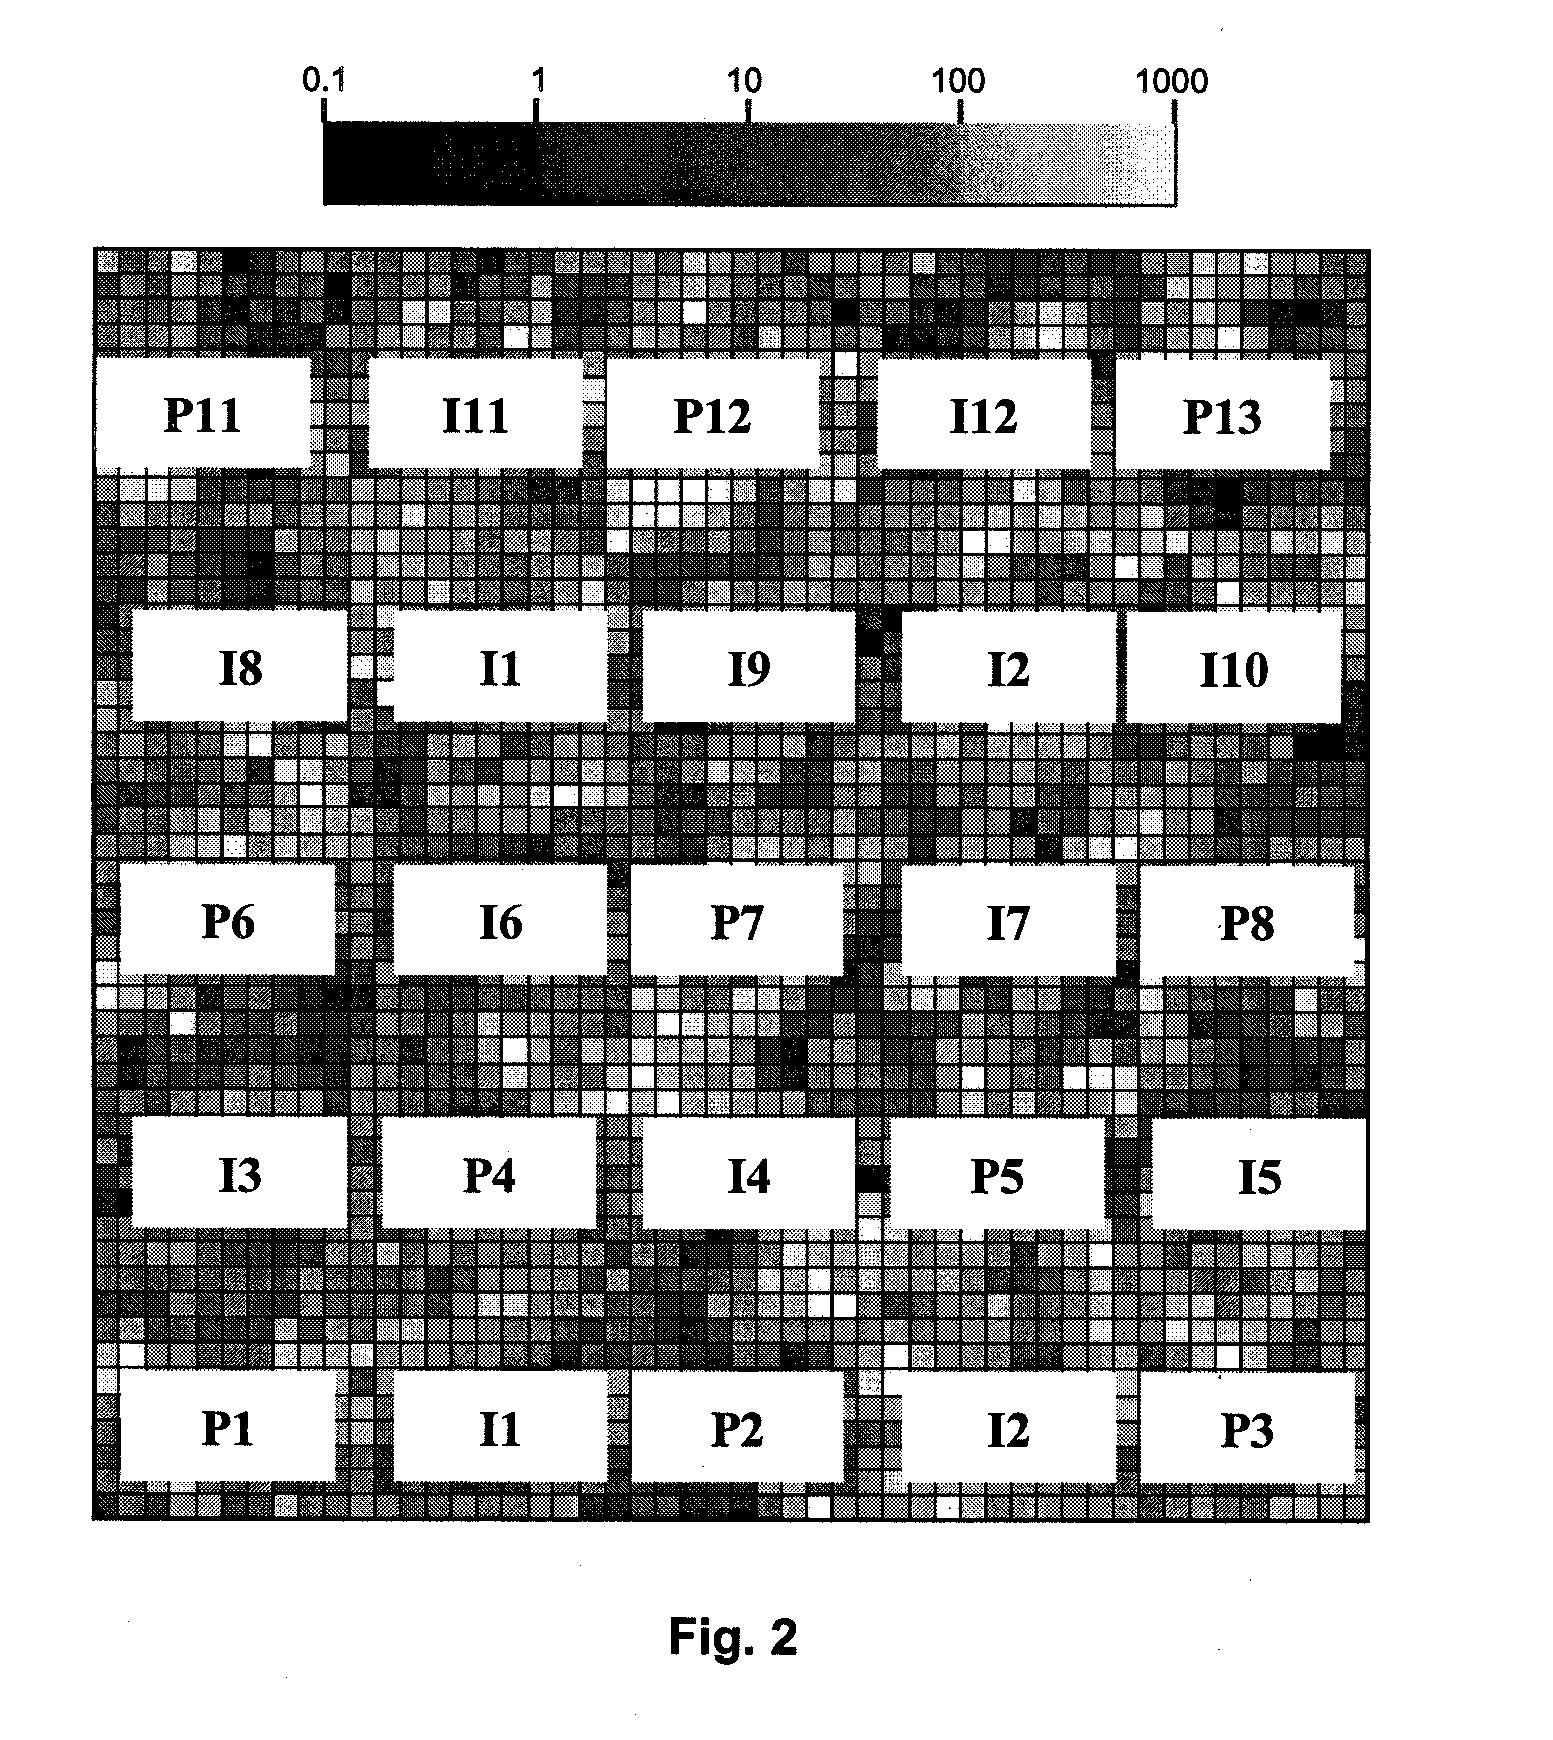 Method of developing a petroleum reservoir from optimized history matching